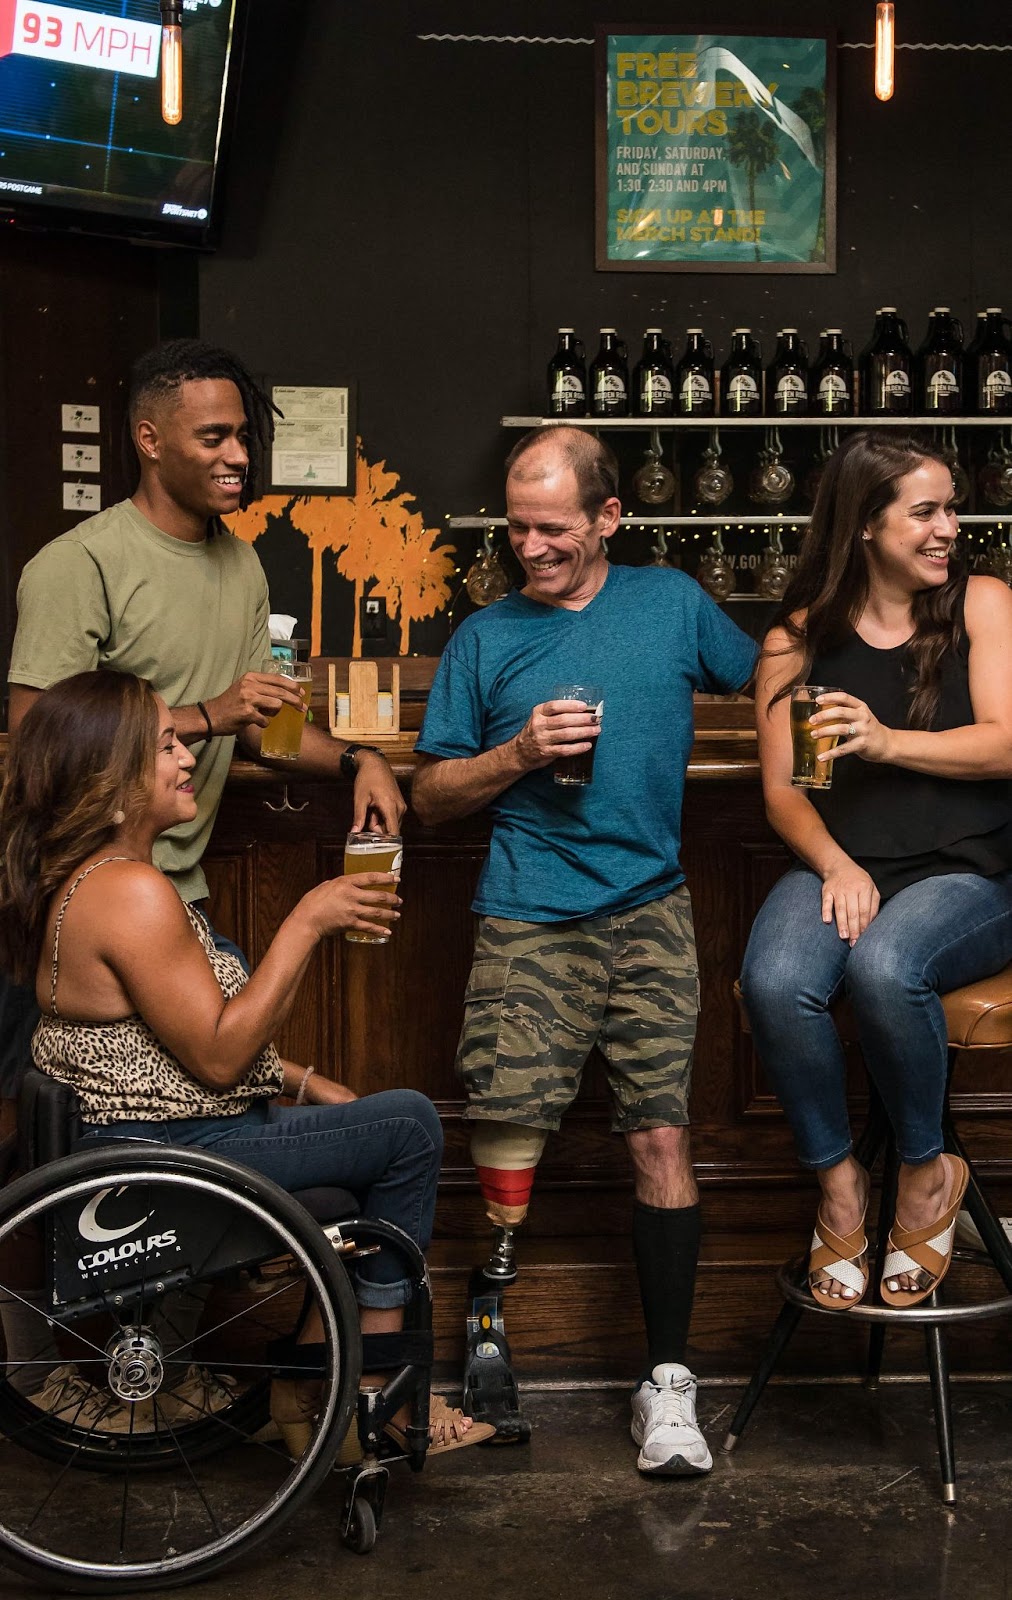 A group of people at a bar drinking and talking; one man has a prosthetic leg, and one woman sits in a wheelchair.